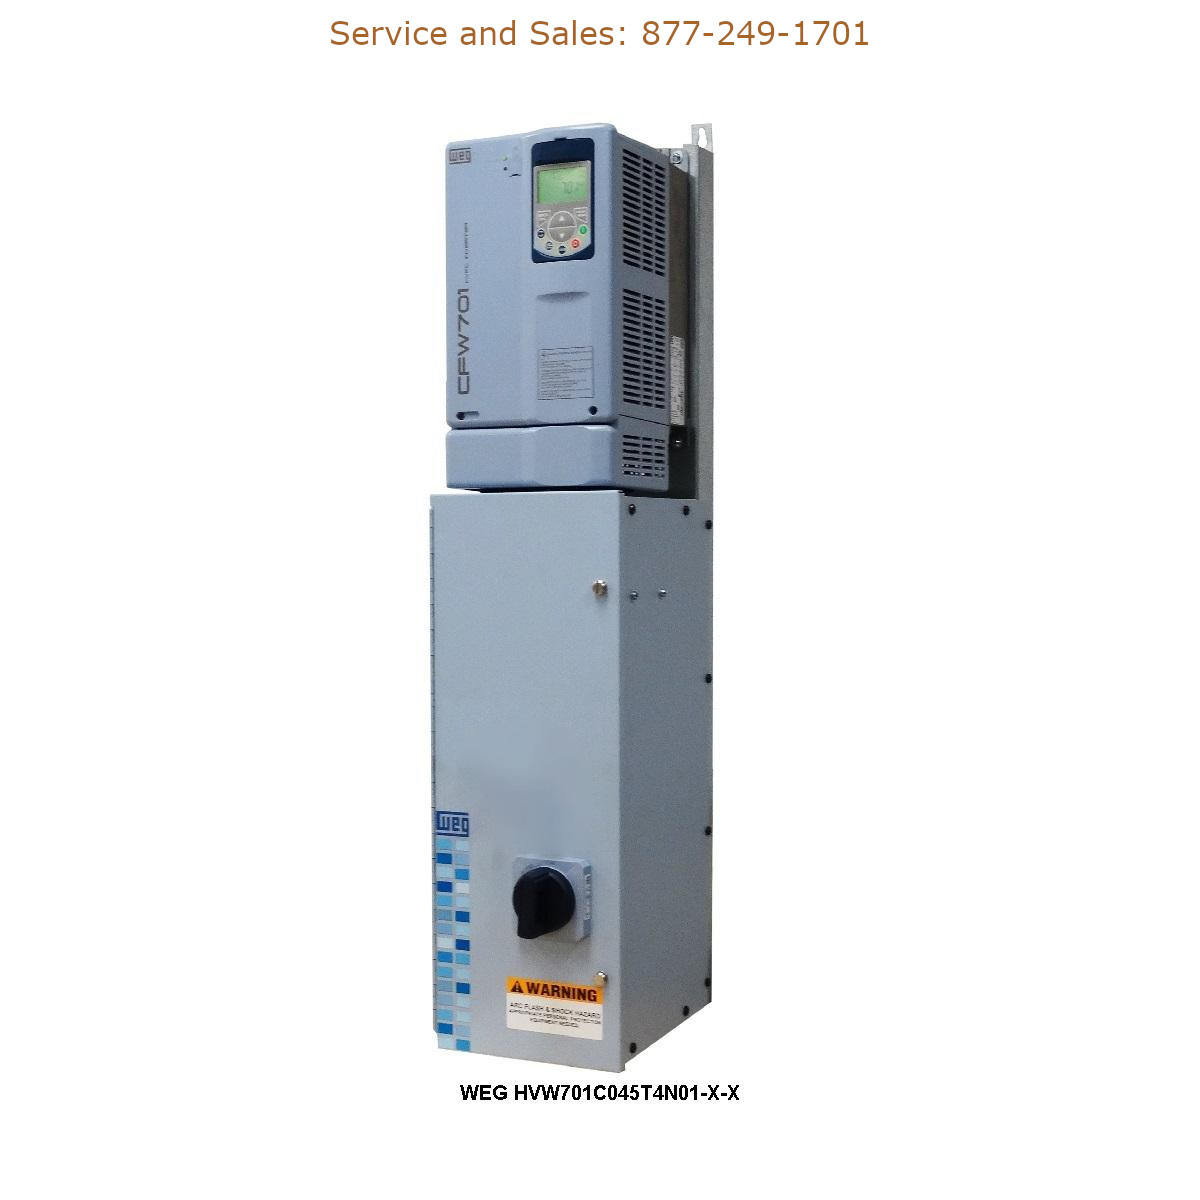 WEG HVW701C045T4N01-X-X WEG Model Number HVW701C045T4N01-X-X WEG Drives, Variable Speed Drives Repair Service, Troubleshooting, Replacement Parts https://gesrepair.com/wp-content/uploads/2022/WEG/WEG_HVW701C045T4N01-X-X_Drives_Variable_Speed_Drives.jpg